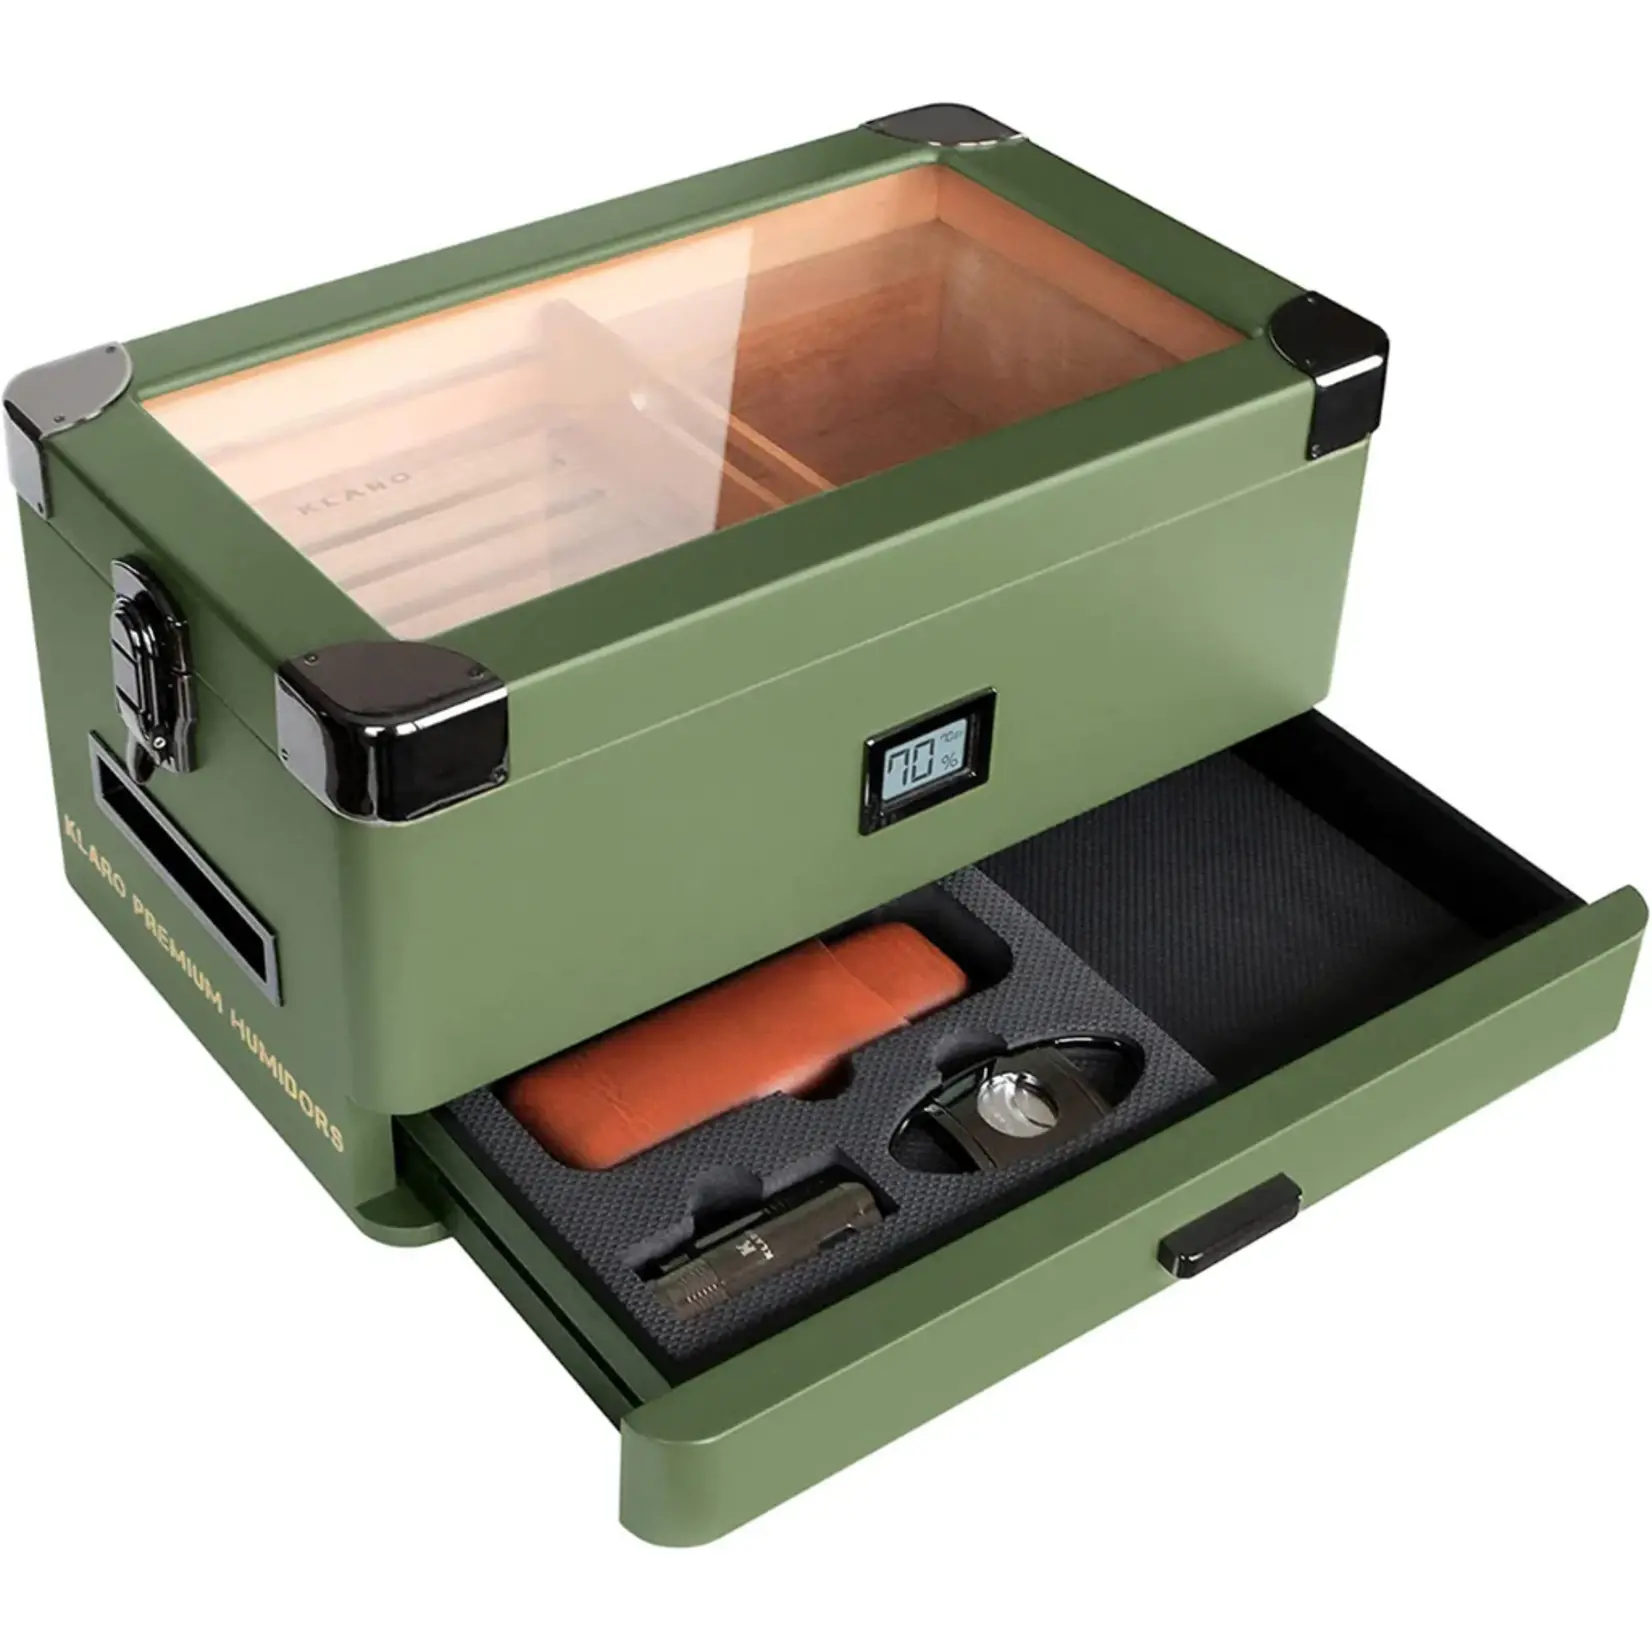 Case Elegance MILITARY GLASS TOP HUMIDOR